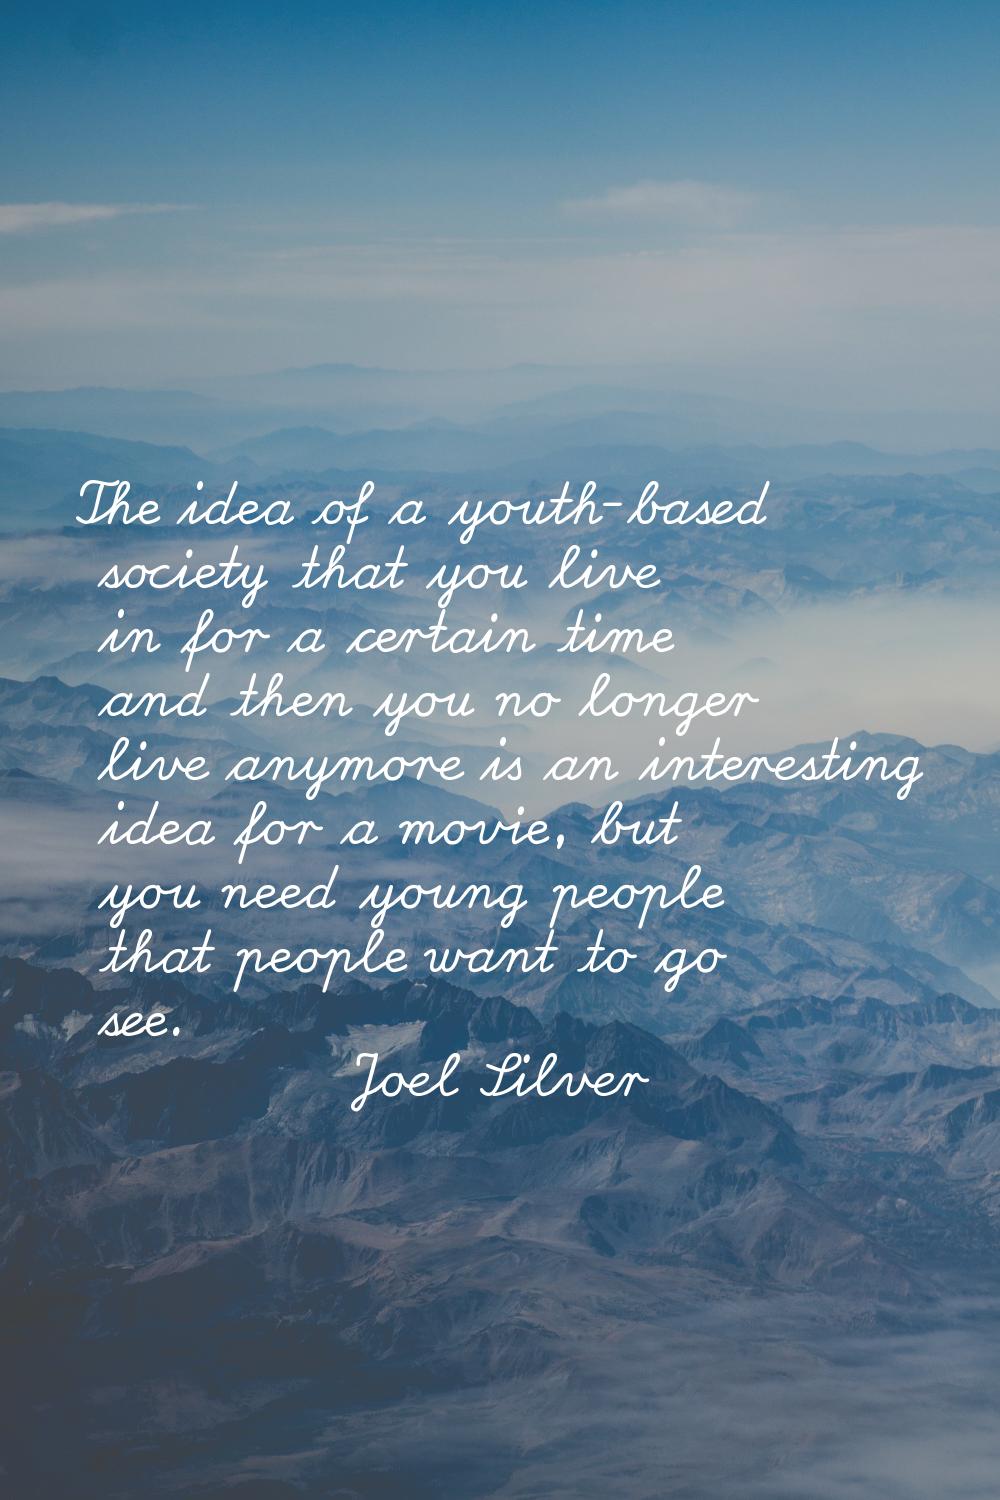 The idea of a youth-based society that you live in for a certain time and then you no longer live a